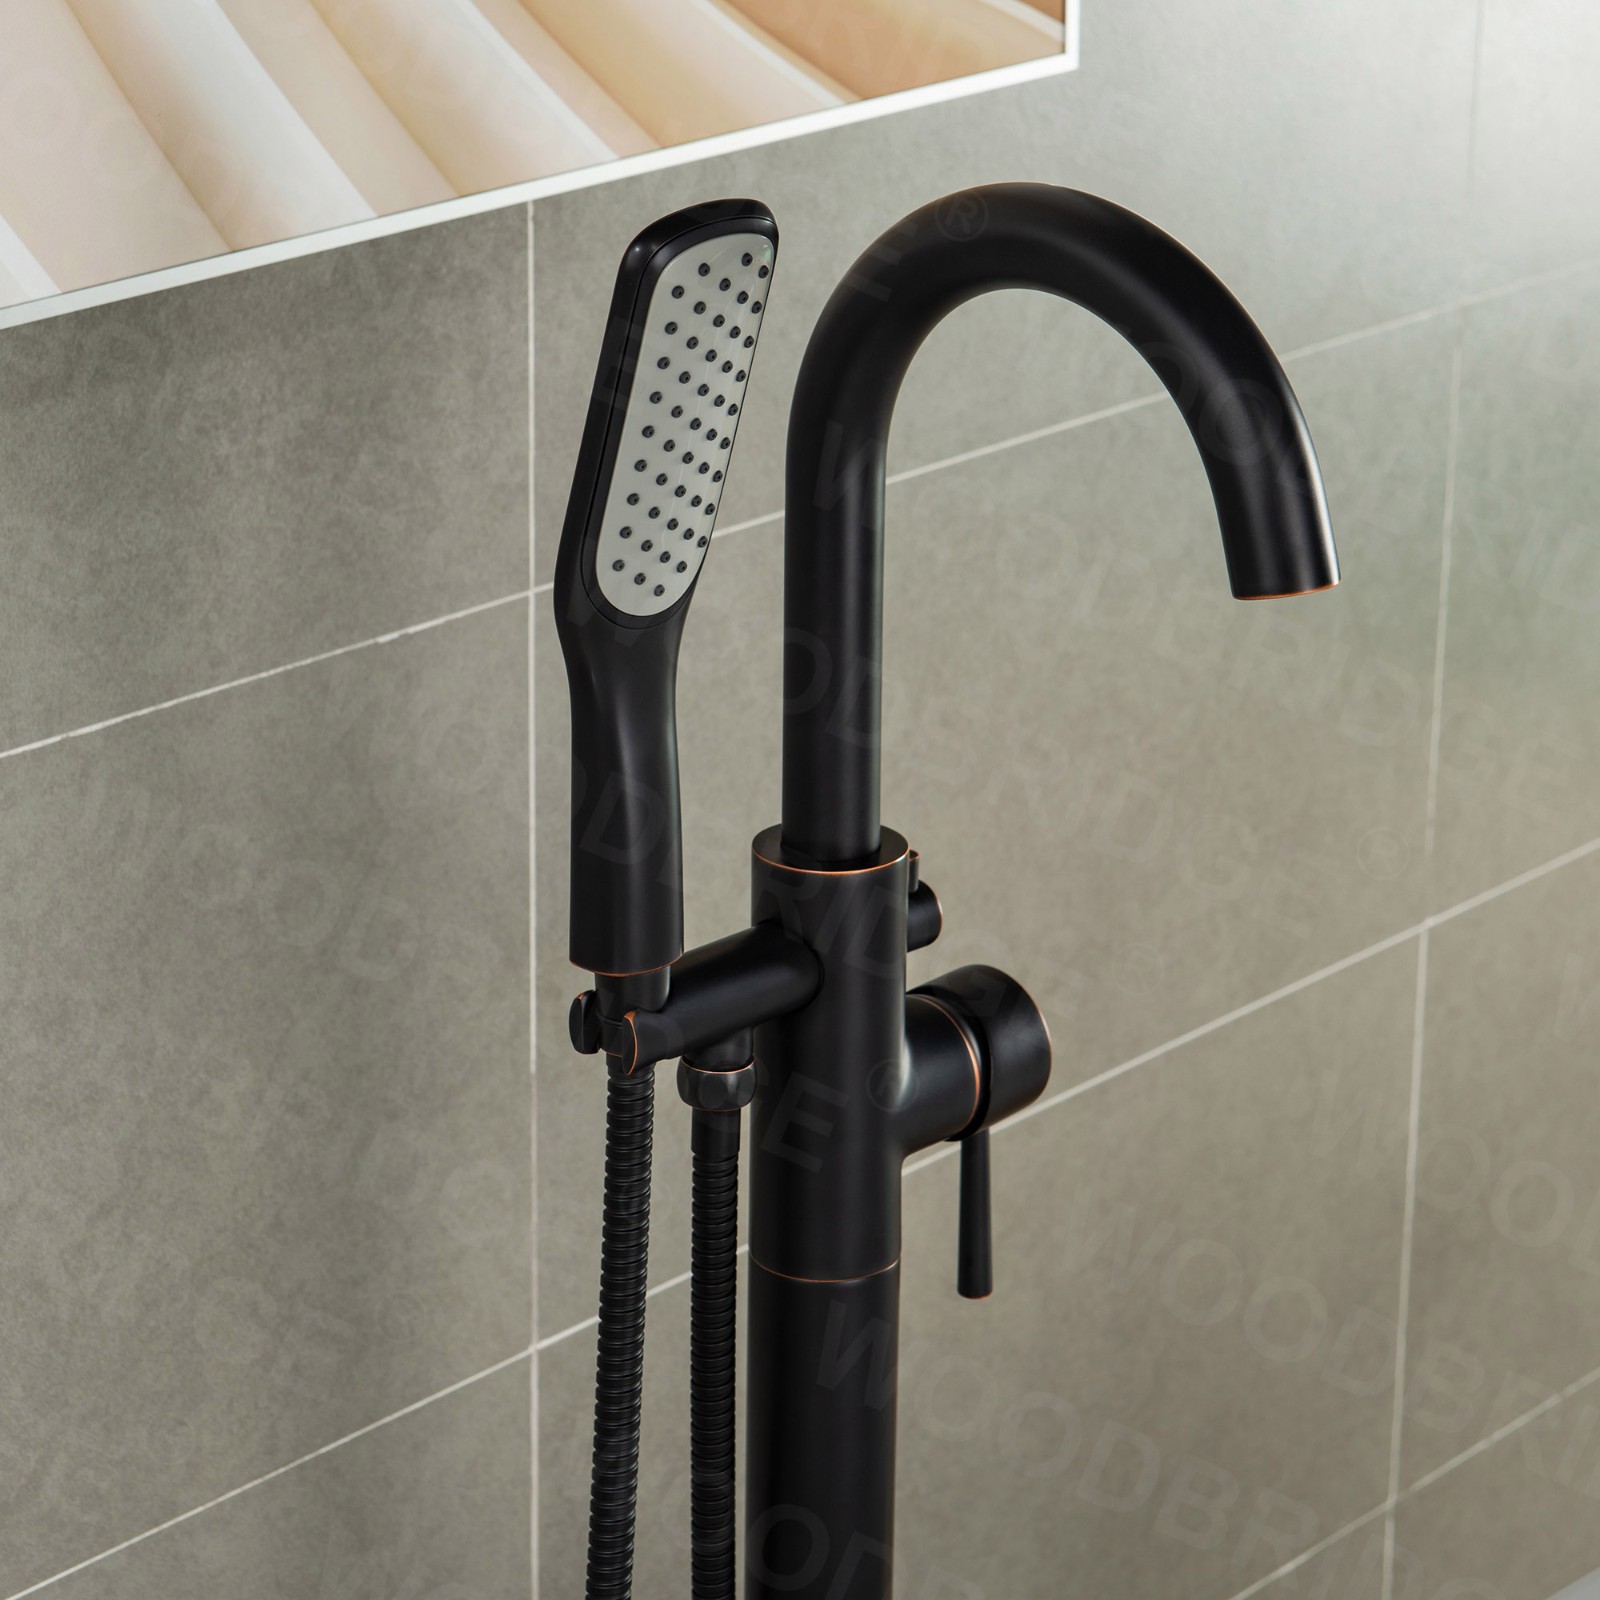  WOODBRIDGE Contemporary Single Handle Floor Mount Freestanding Tub Filler Faucet with Hand Shower in (Oil Rubbed Bronze) Finish,F0010ORBSQ_6035